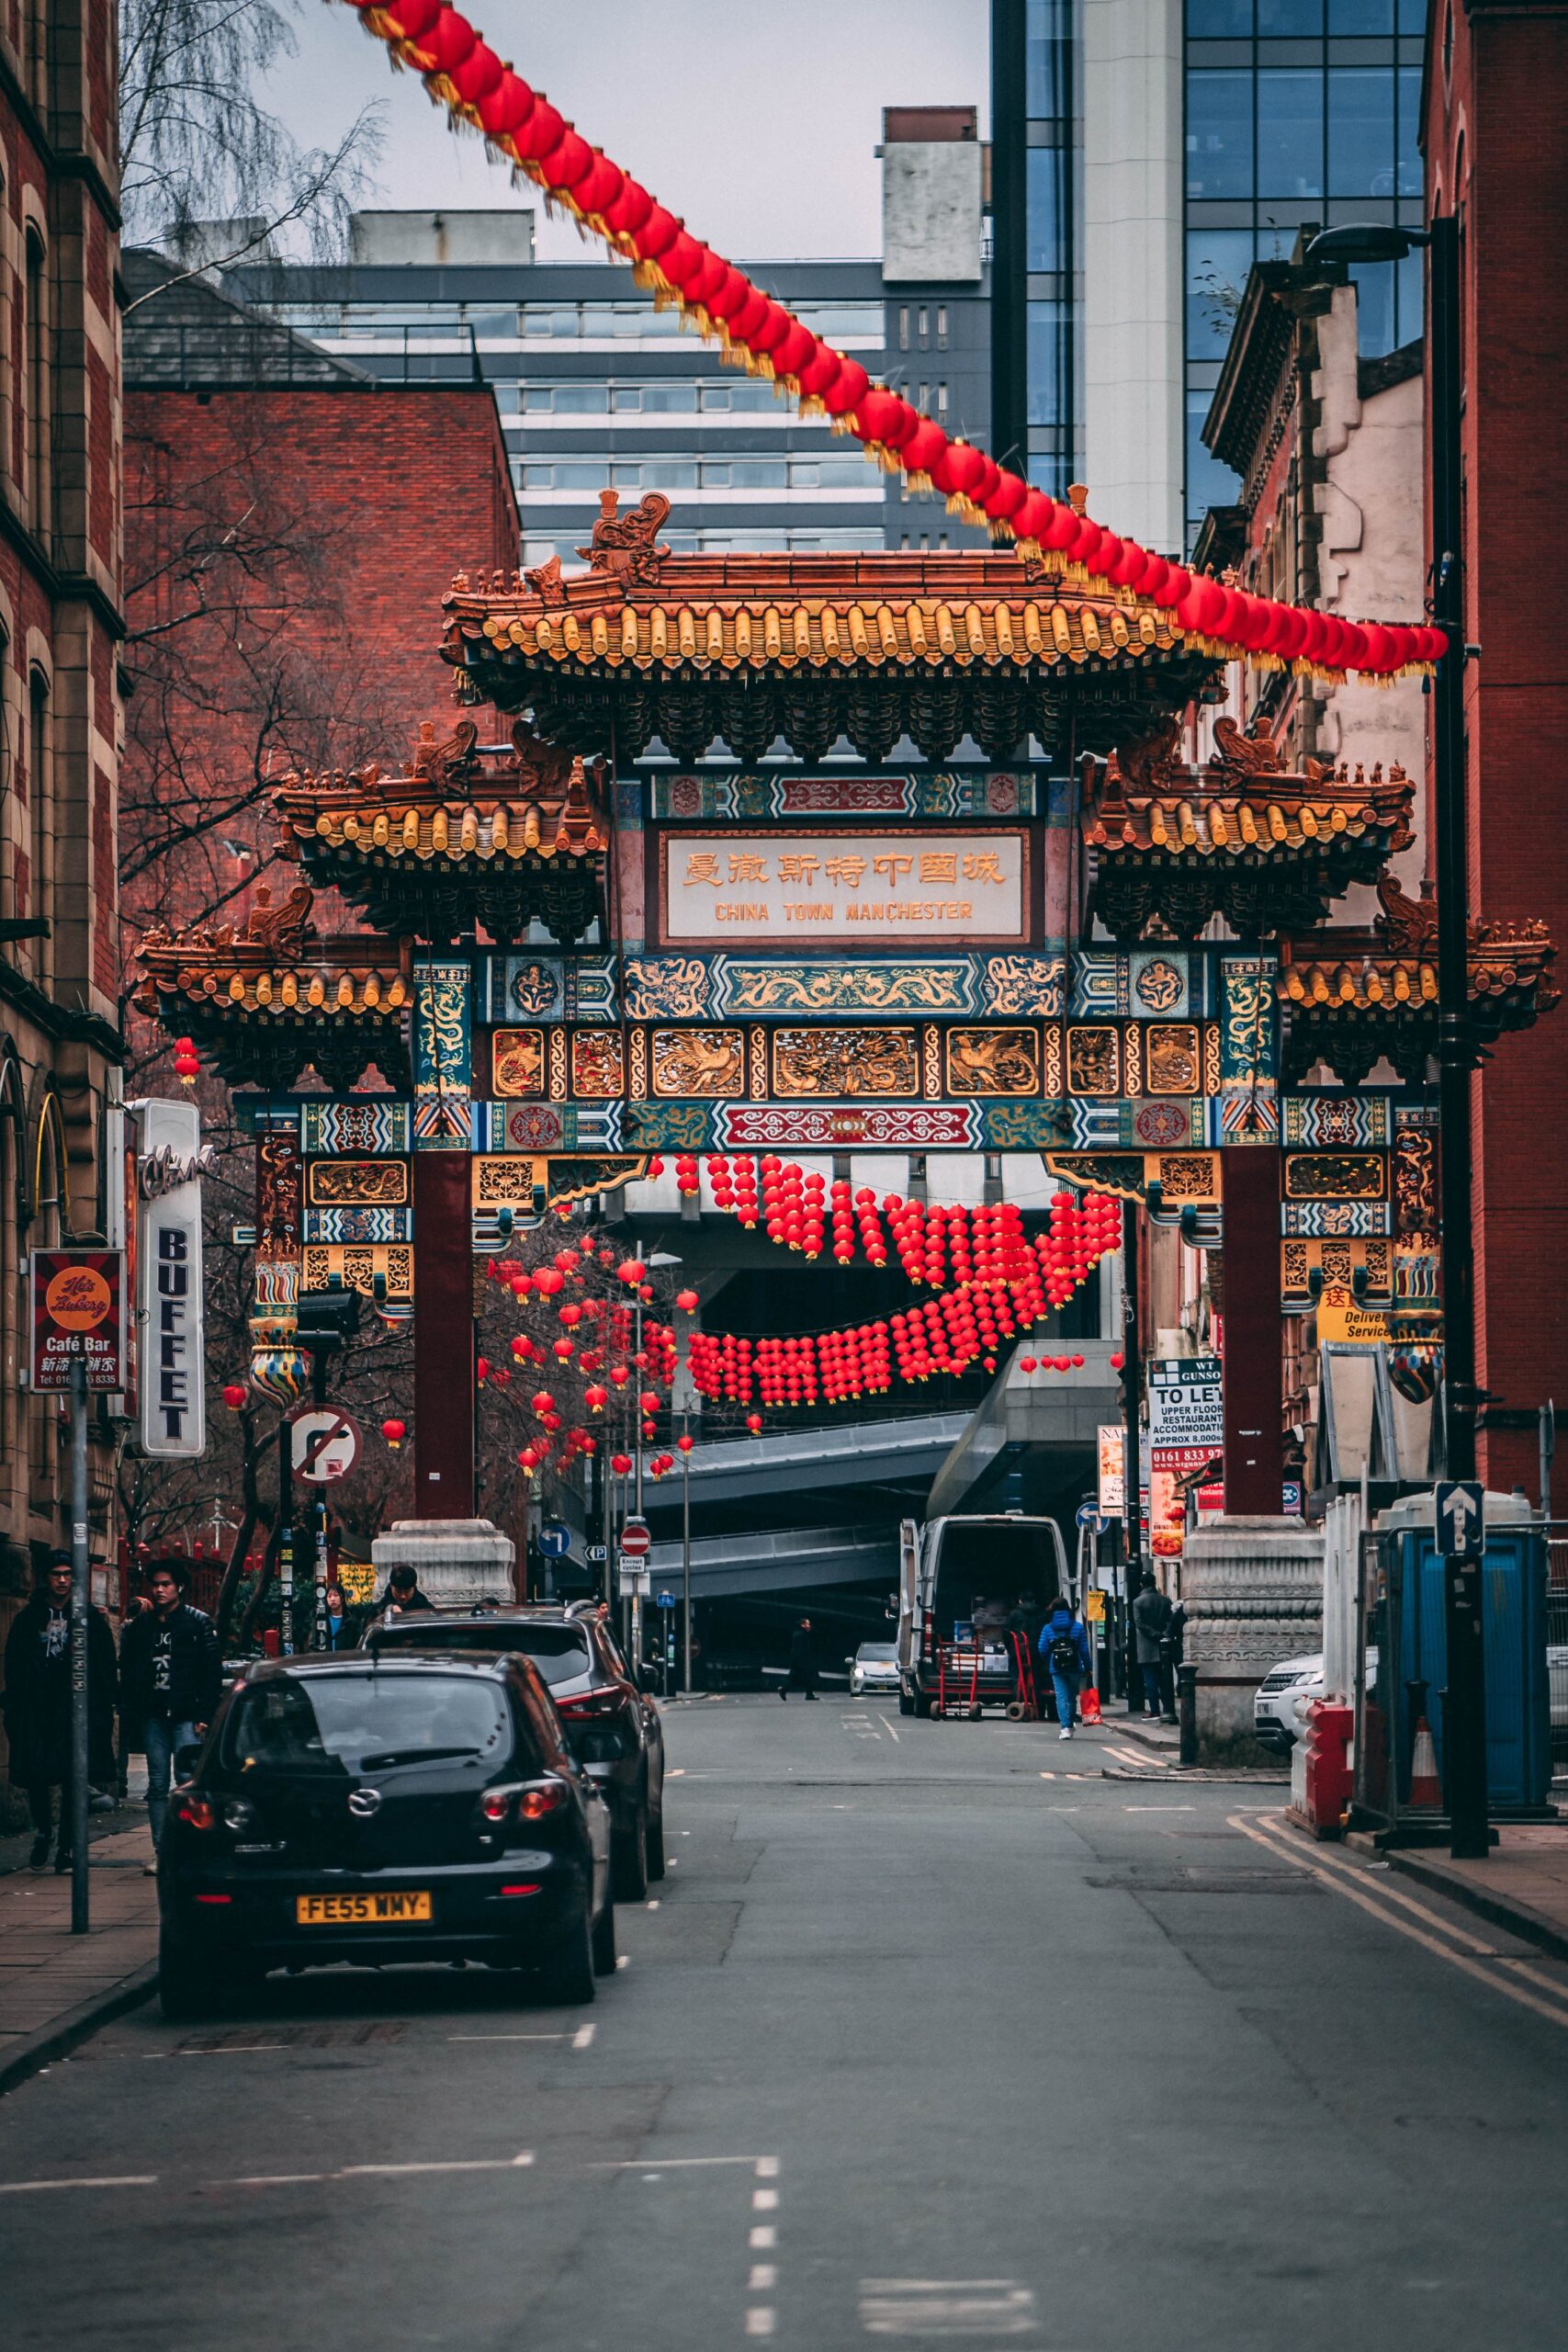 A new market is launching in Chinatown in Manchester this week